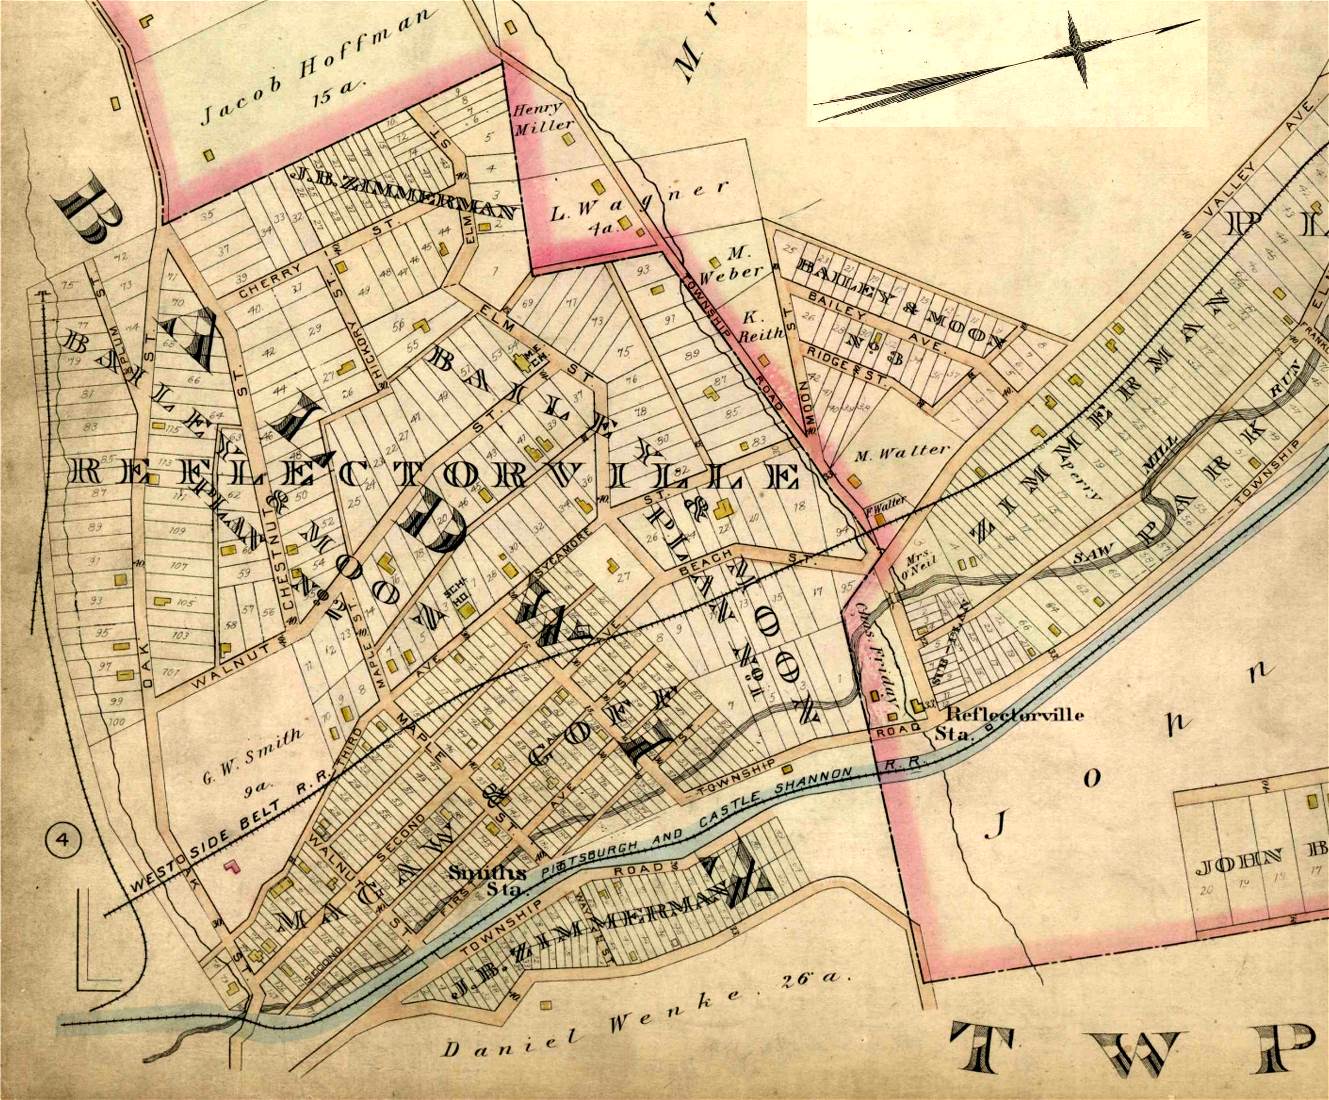 1896 map showing the
small town of Reflectorville.